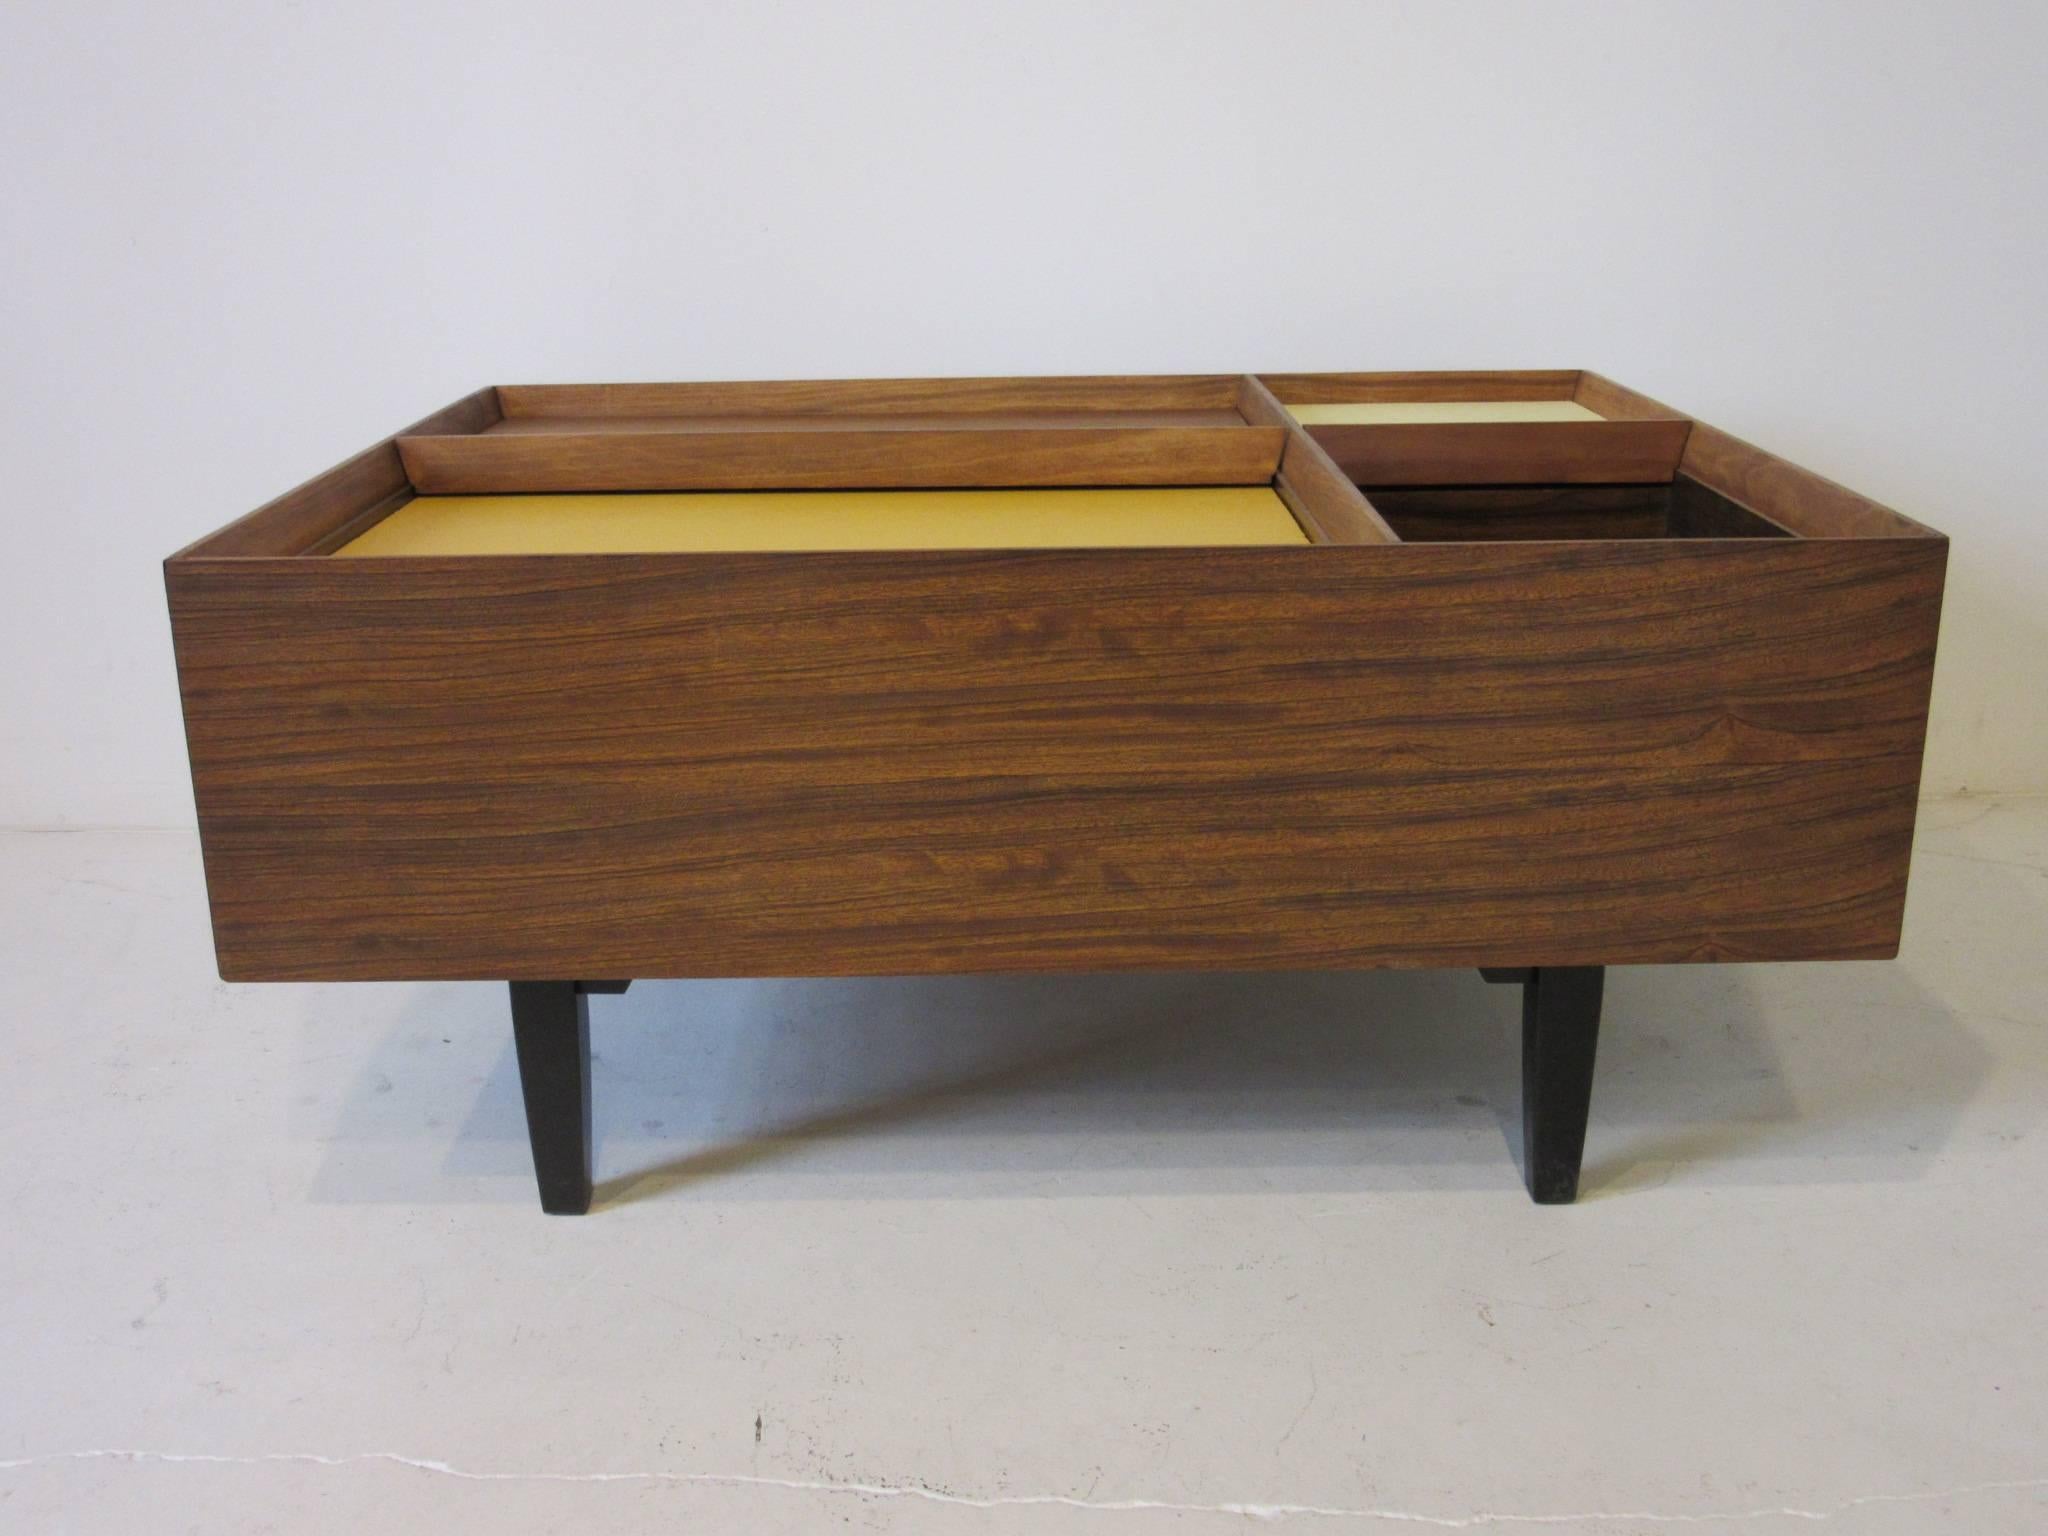 A very early coffee table by Milo Baughman using exotic Mindoro wood from the Philippines which is know for it's beautiful grain and shimmering affect. The three sliding upper doors reveling large storage bins and one open storage box. Manufactured